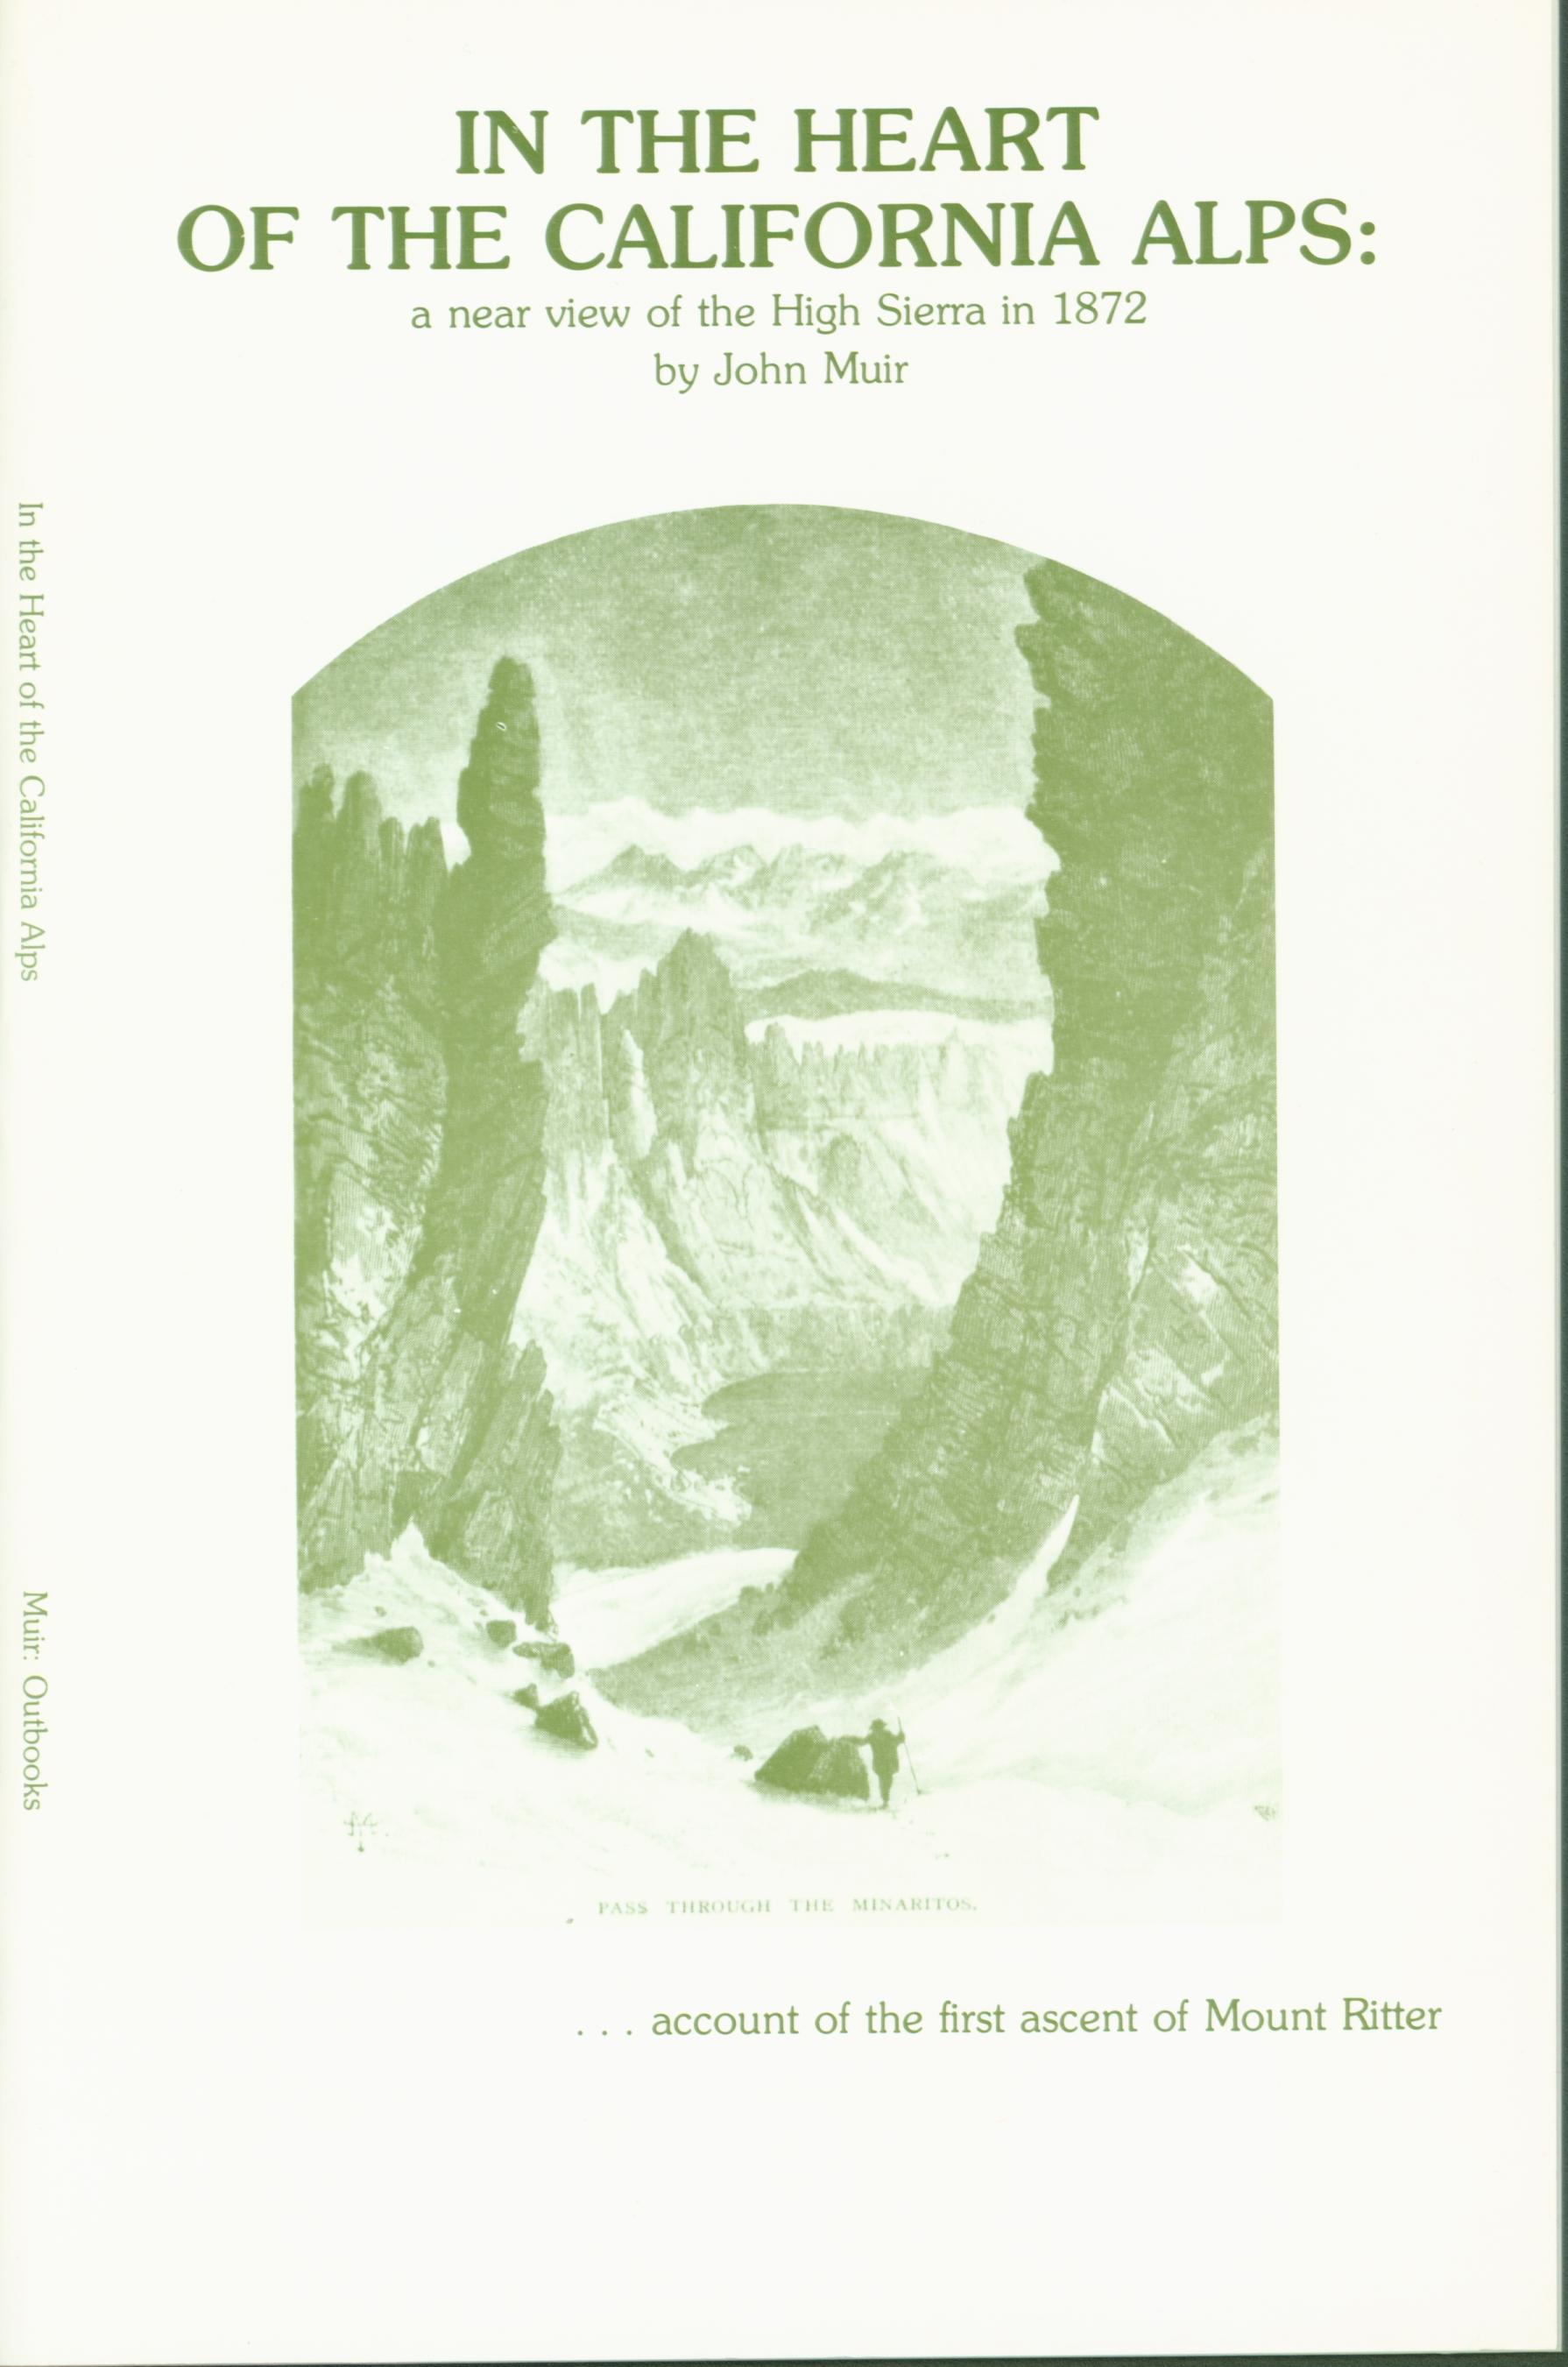 In the Heart of the California Alps: a near view of the High Sierra in 1872. vist026frontcover